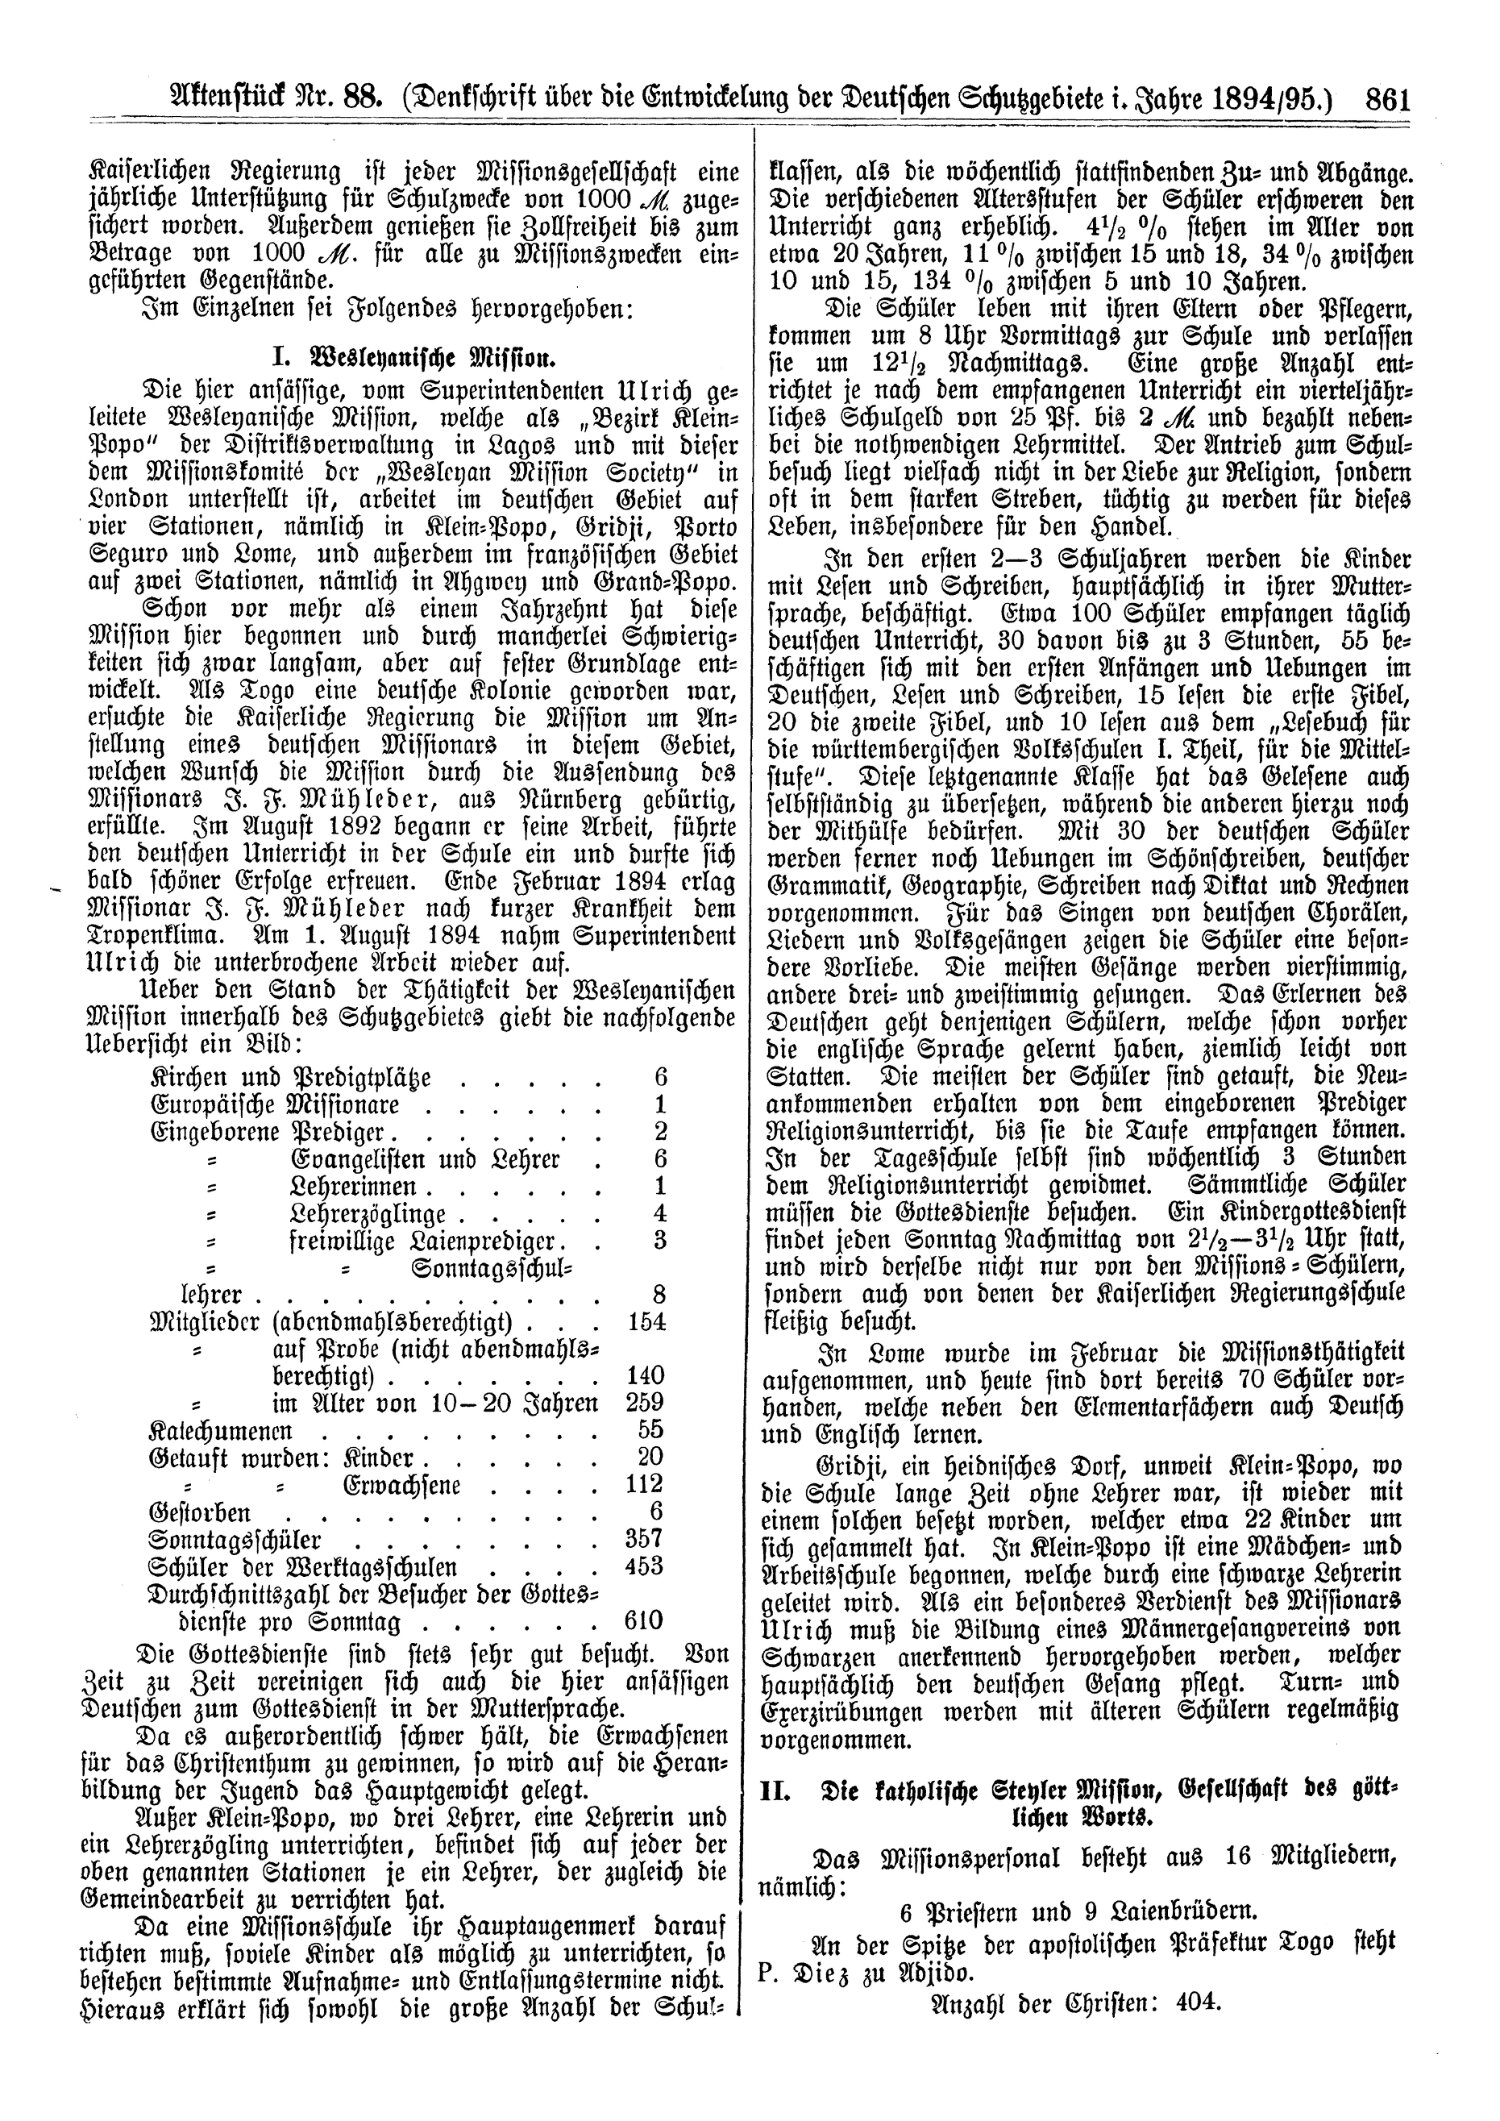 Scan of page 861